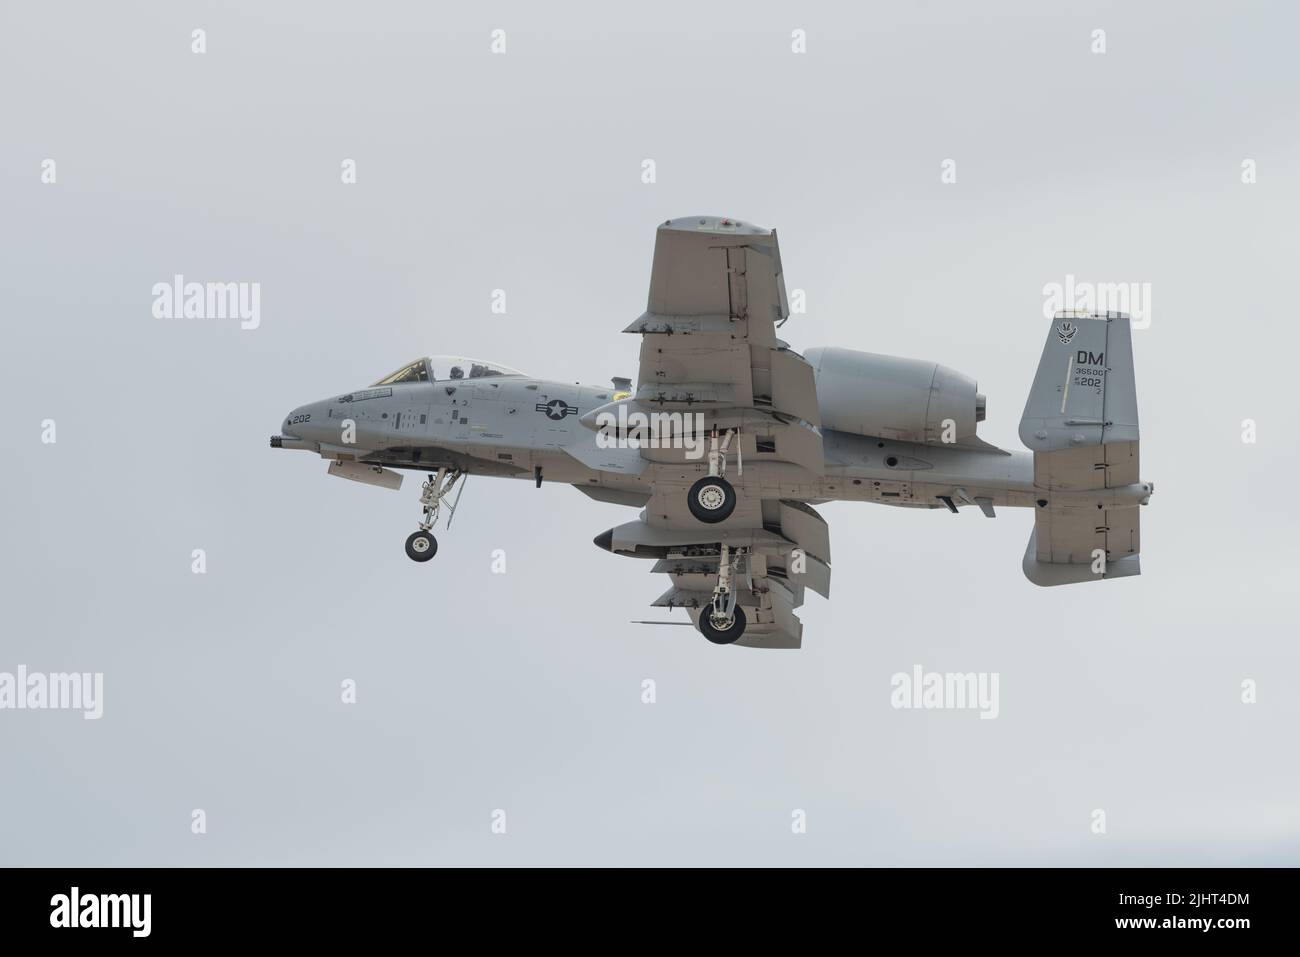 Air Force Fairchild A-10 Thunderbolt II 355th Operations Group, 355 OG, shown flying over Chino Airport, California, USA on May 6, 2018: Stock Photo